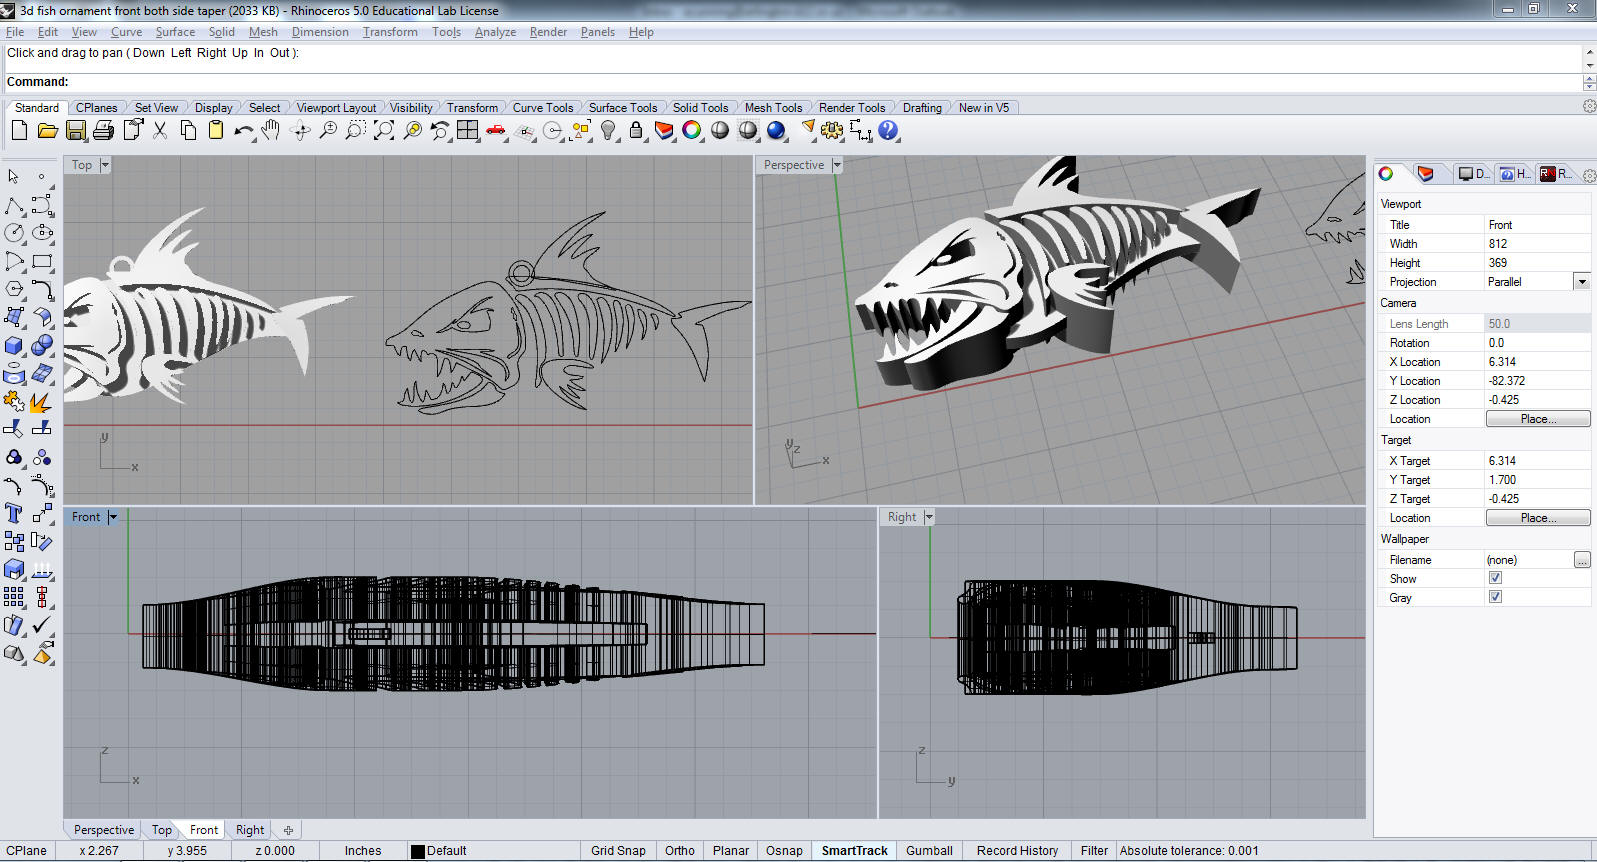 RHINO CAD 6.0  RHINO CAD 6.0 We use RHINO for 2d and 3D design to be printed in vinyl, ABSplastic, or steel.